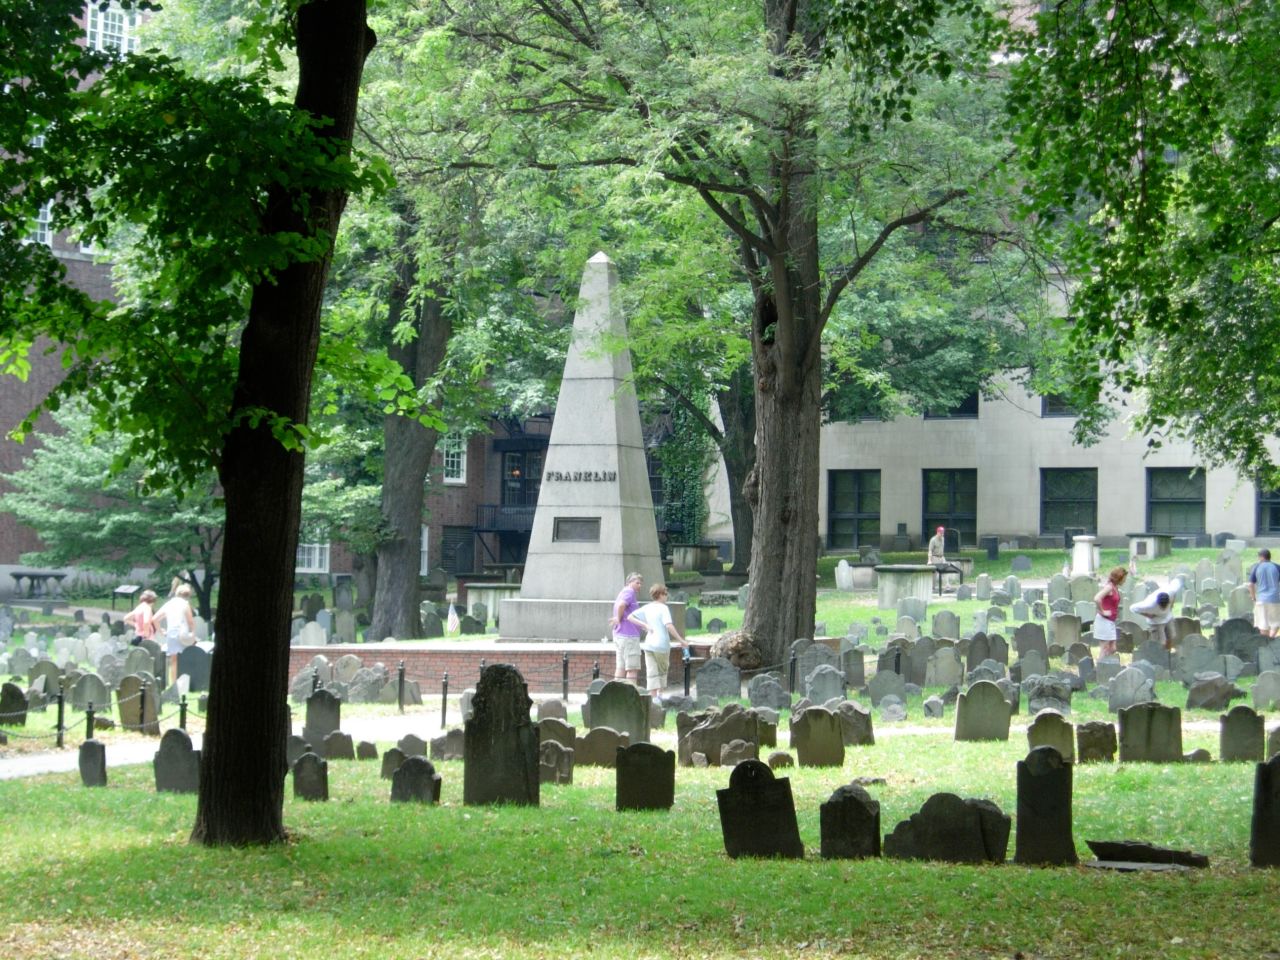 Dating back to 1660, this small cemetery holds many Revolutionary War heroes, including Paul Revere, John Hancock and Samuel Adams. Although this monument belongs to Benjamin Franklin's family, Ben's final resting place is in Philadelphia. 